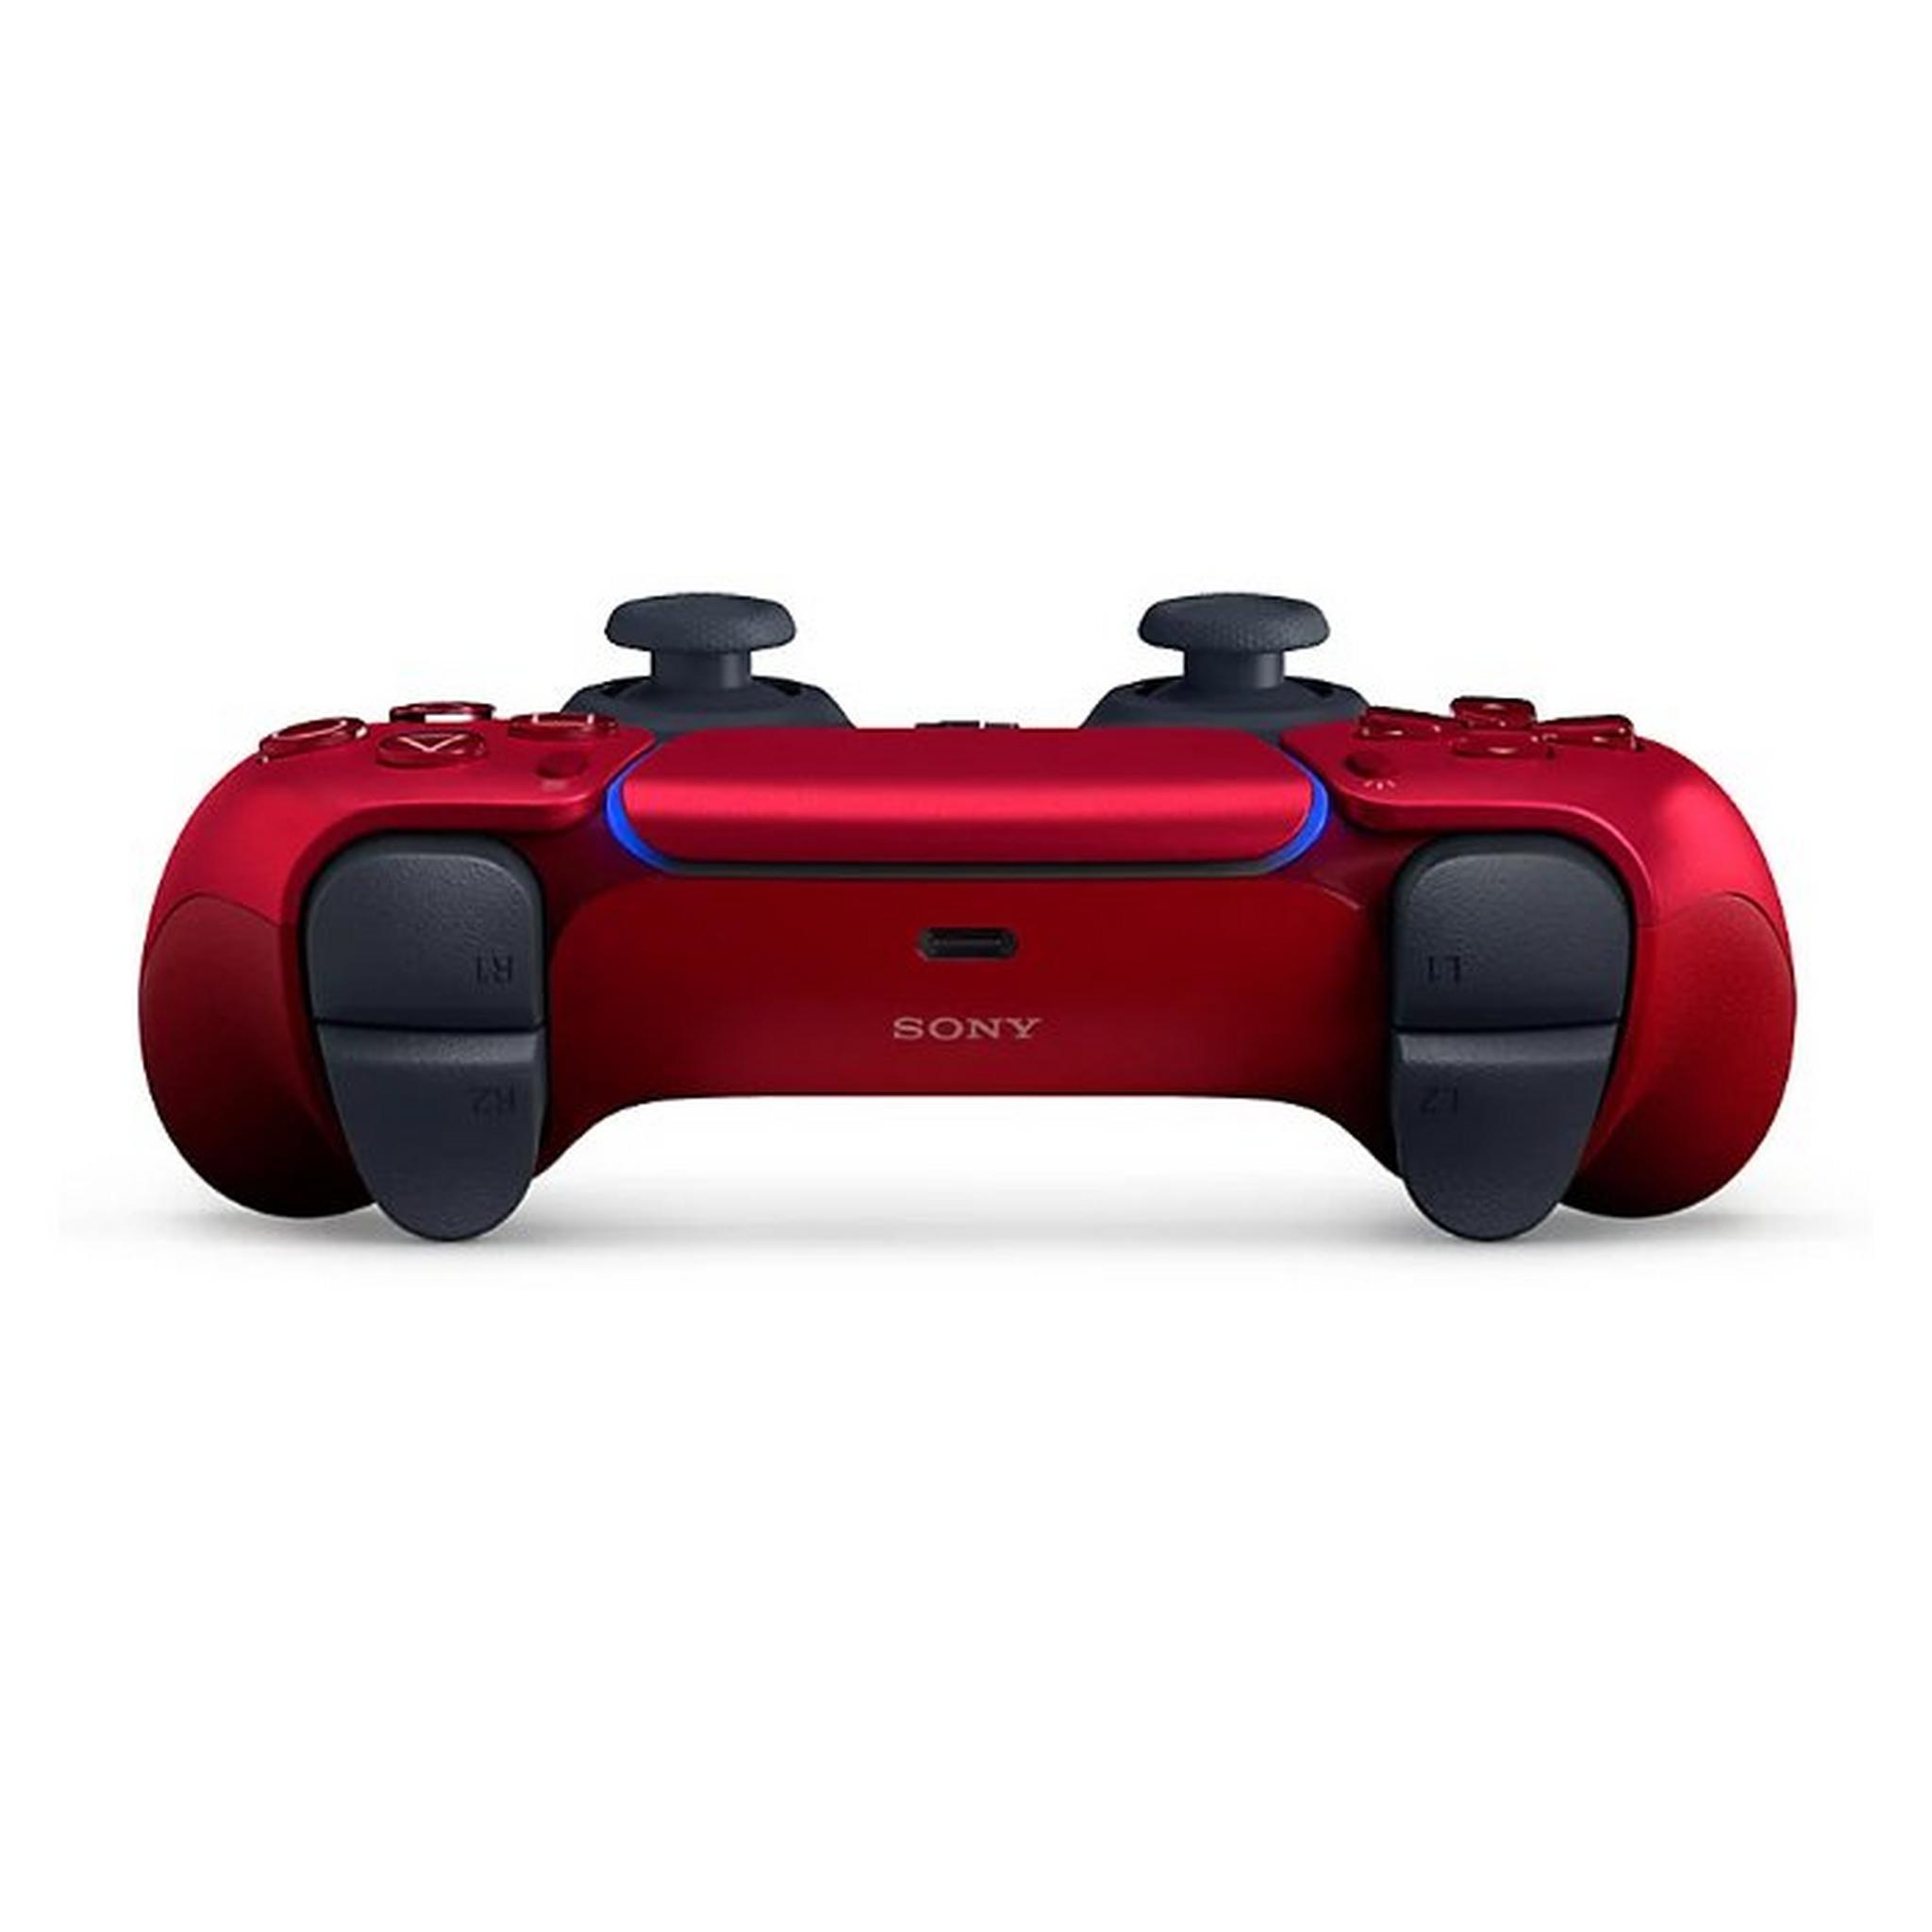 SONY Playstation 5 Dualsense Wireless Controller, CFI-ZCT1W07X - Volcanic Red